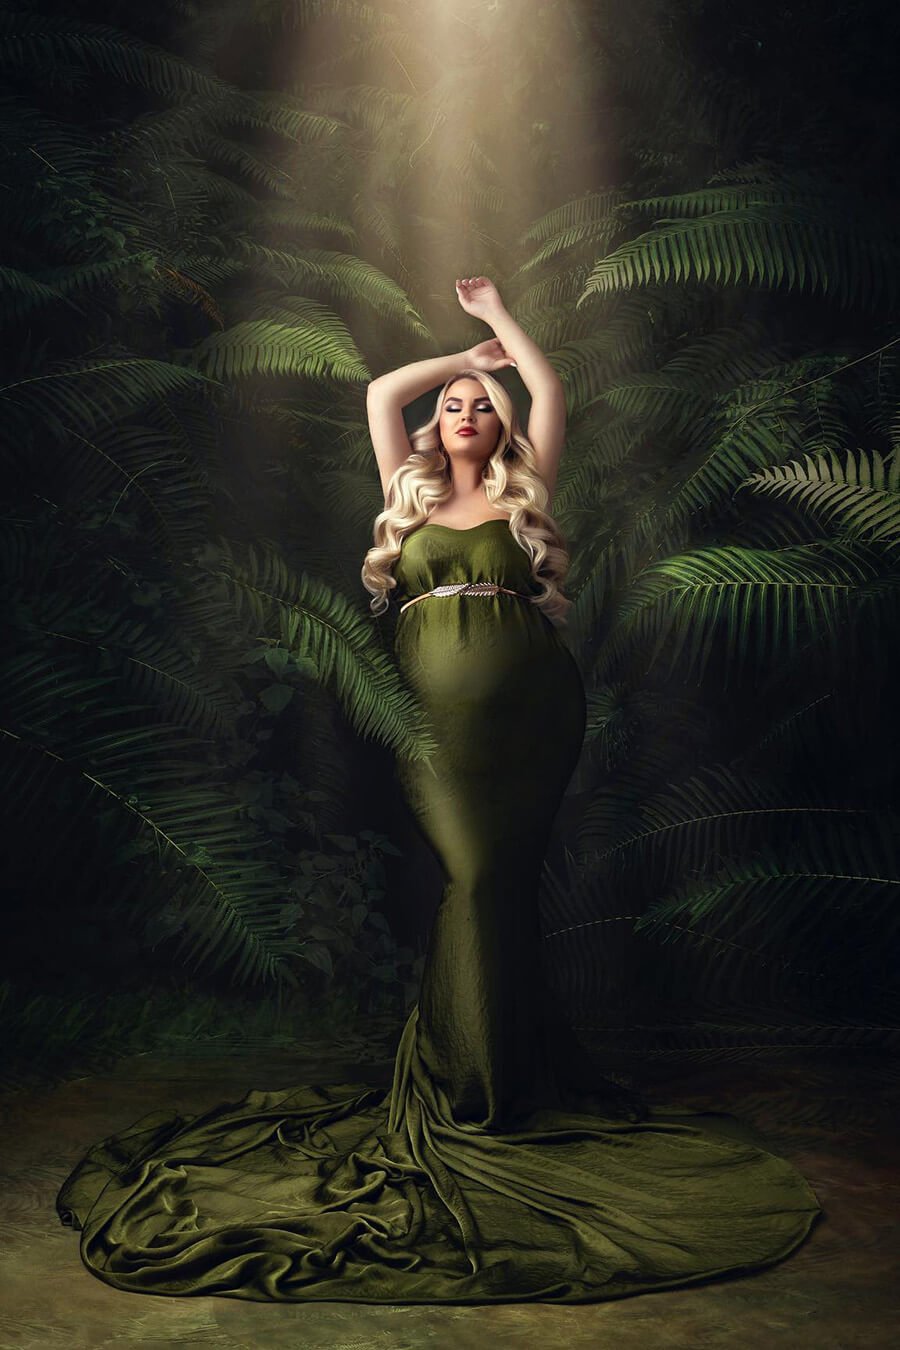 blond model poses next to green plants wearing a moss green silky scarf tied as a dress on her body. there is a sash to tie the scarf on her body.